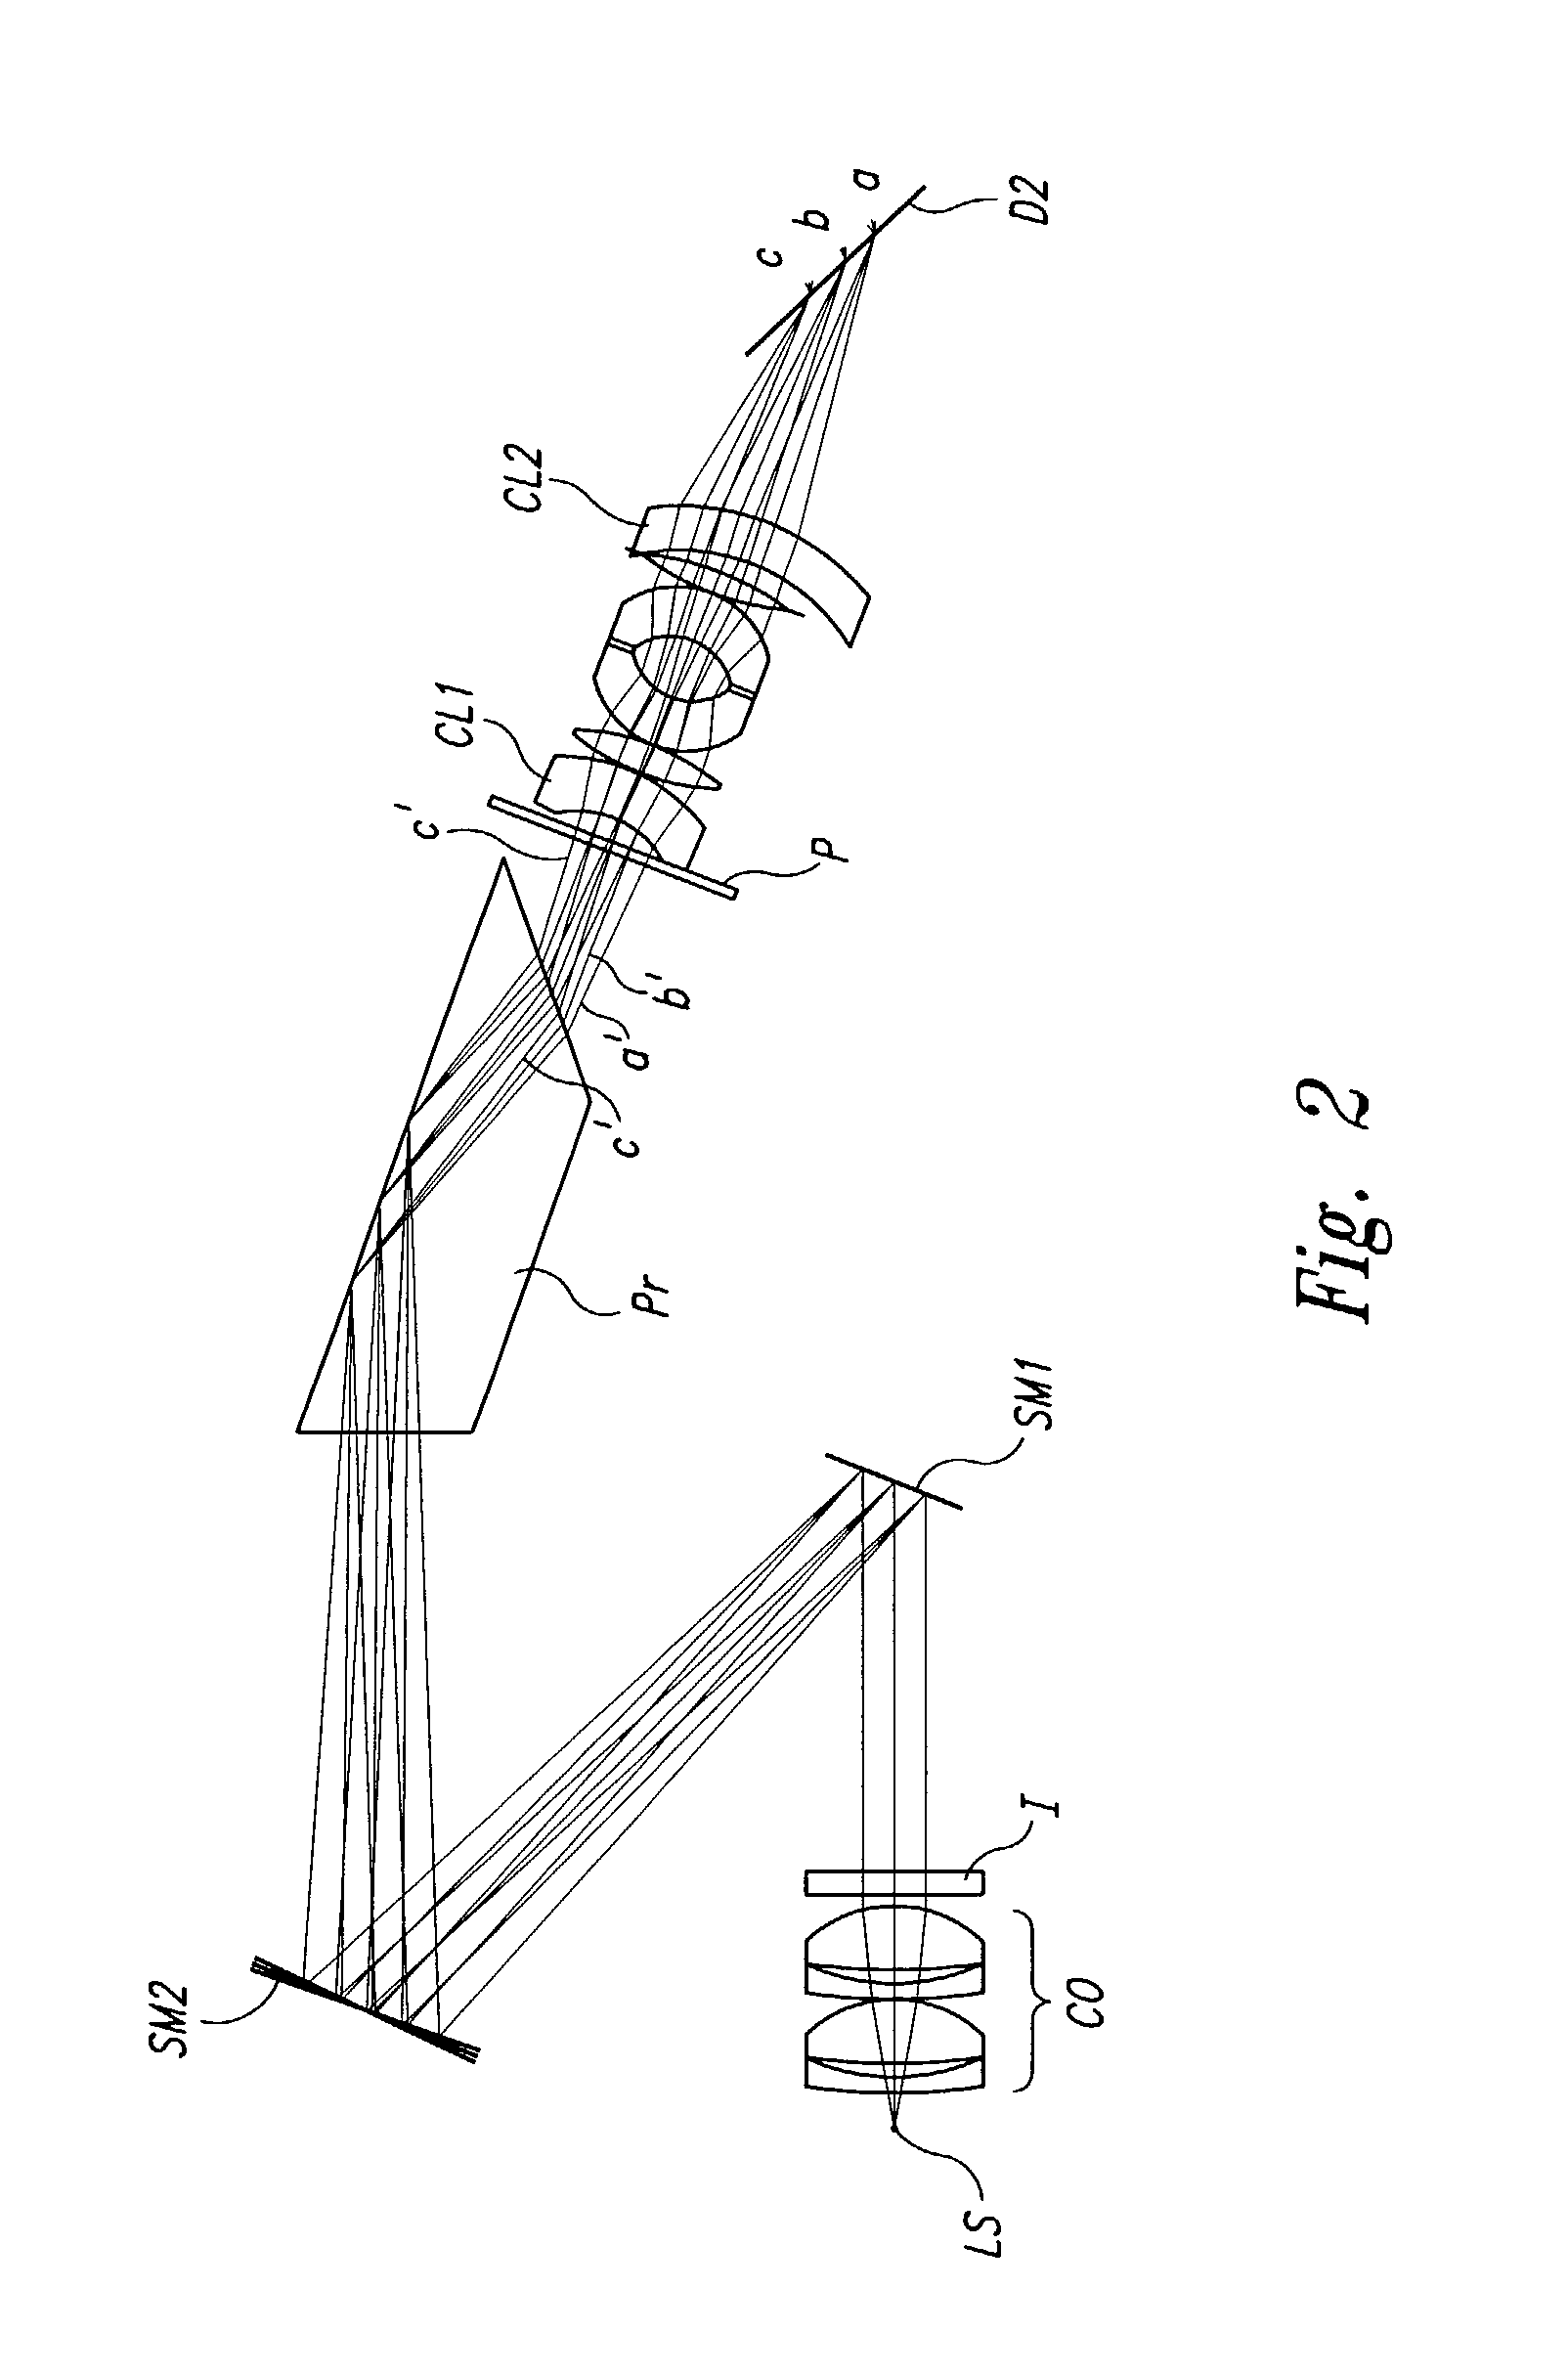 Analytical method and apparatus